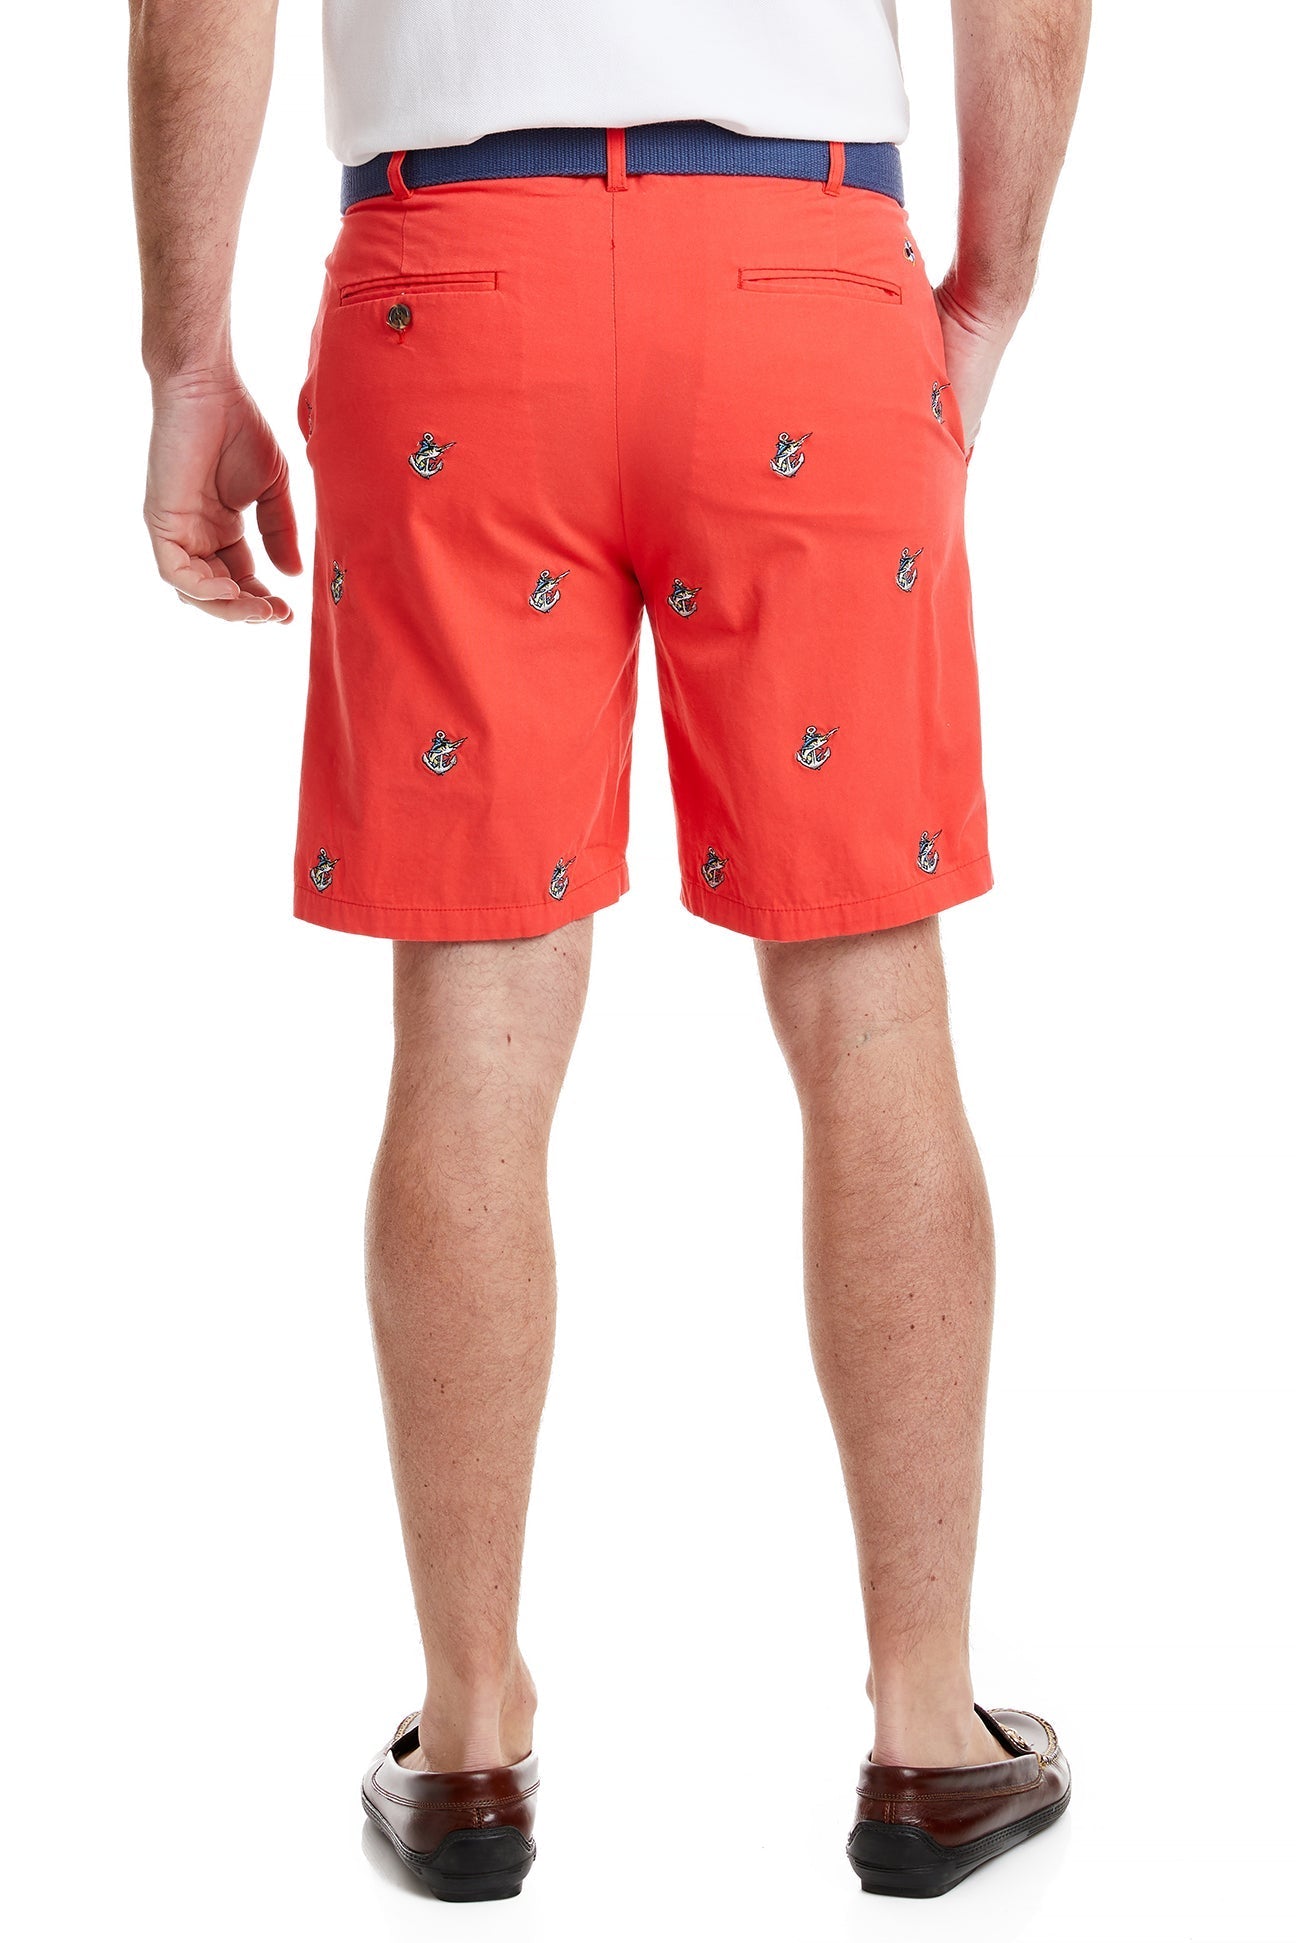 Island Short Canvas Washed Red with Anchor & Fish MENS EMBROIDERED SHORTS Castaway Nantucket Island